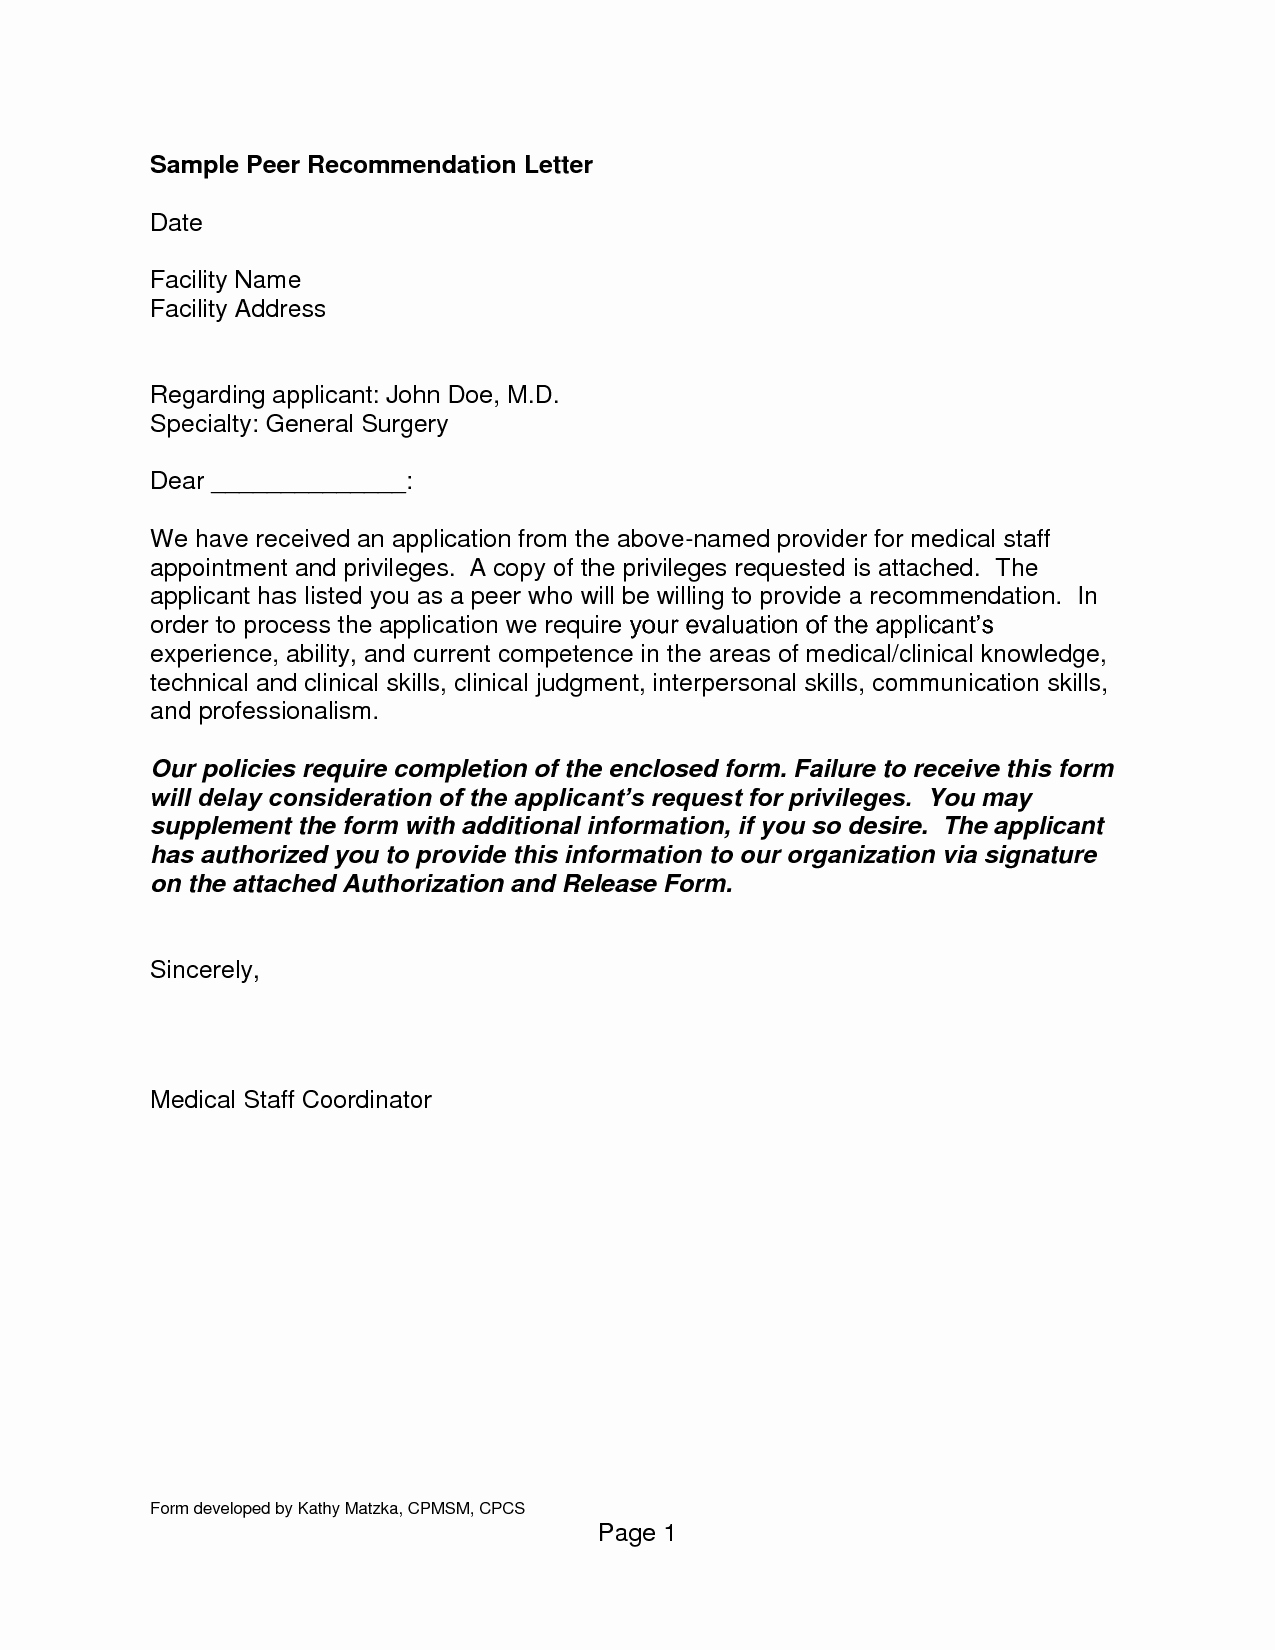 General Recommendation Letter for Employee Lovely General Re Mendation Letter for Employee